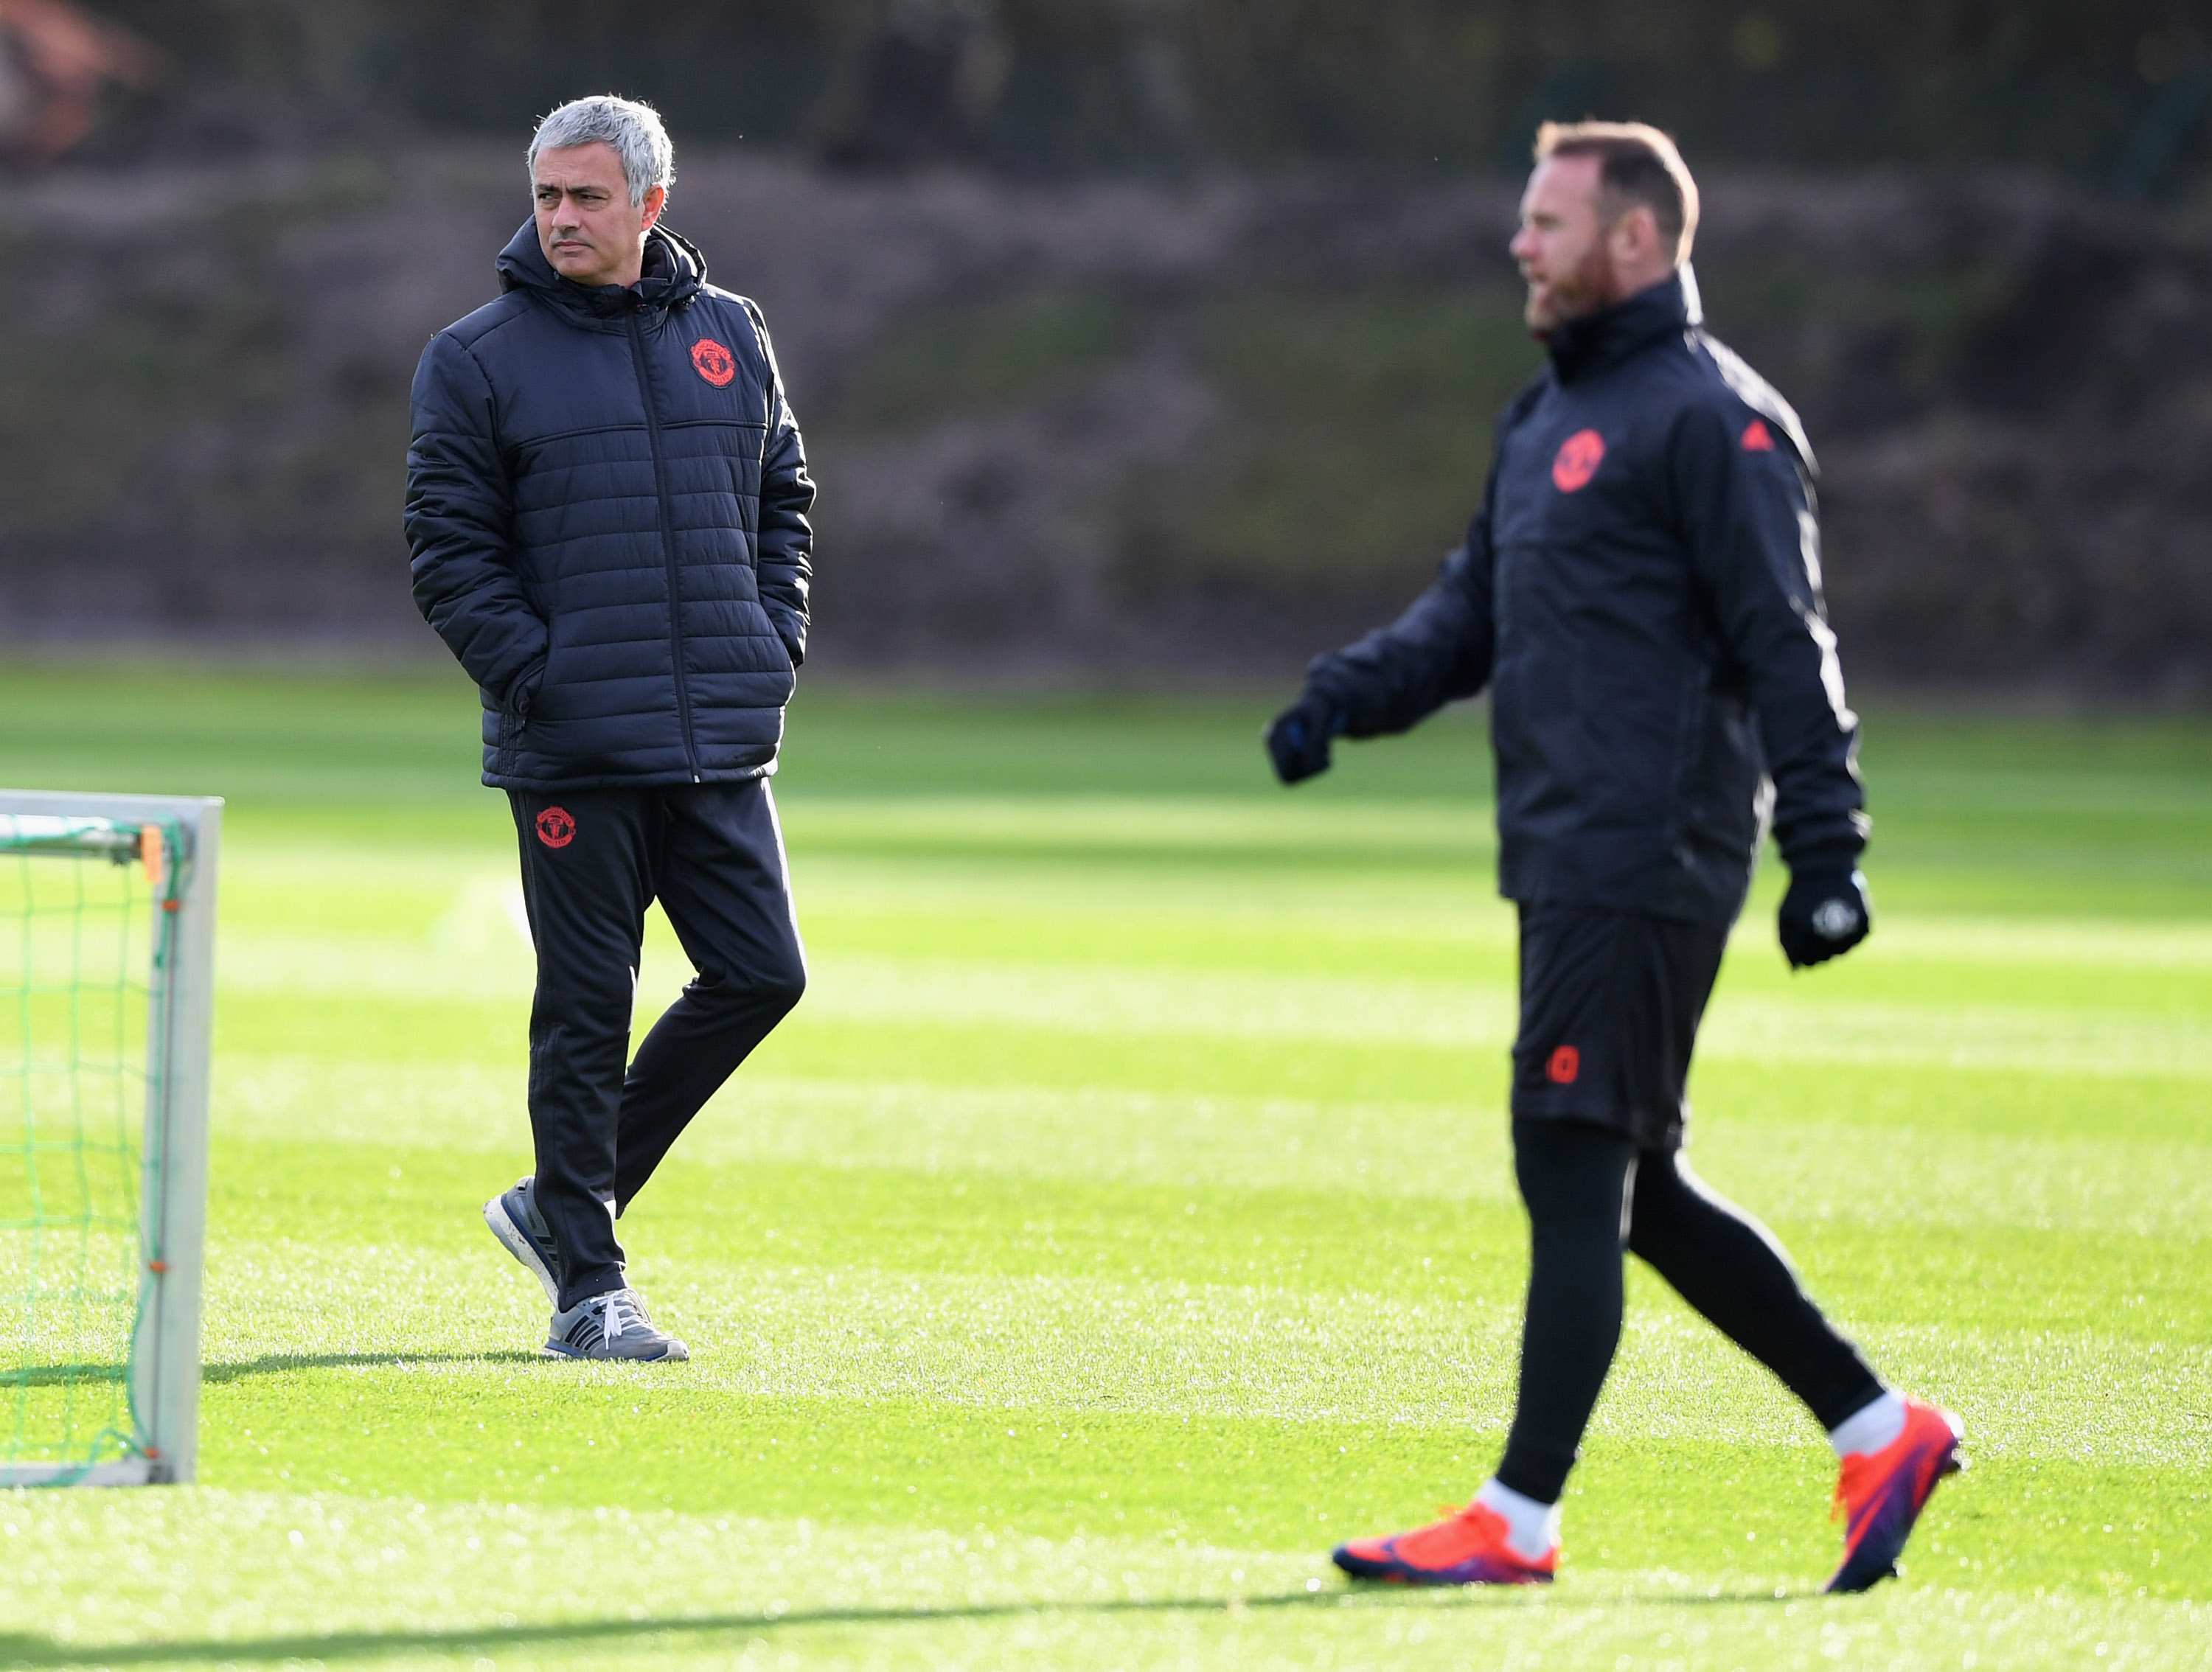 MANCHESTER, ENGLAND - NOVEMBER 23:  Jose Mourinho manager of Manchester United and Wayne Rooney look on during a Manchester United training session on the eve of their UEFA Europa League match against Feyenoord at Aon Training Complex on November 23, 2016 in Manchester, England.  (Photo by Gareth Copley/Getty Images)